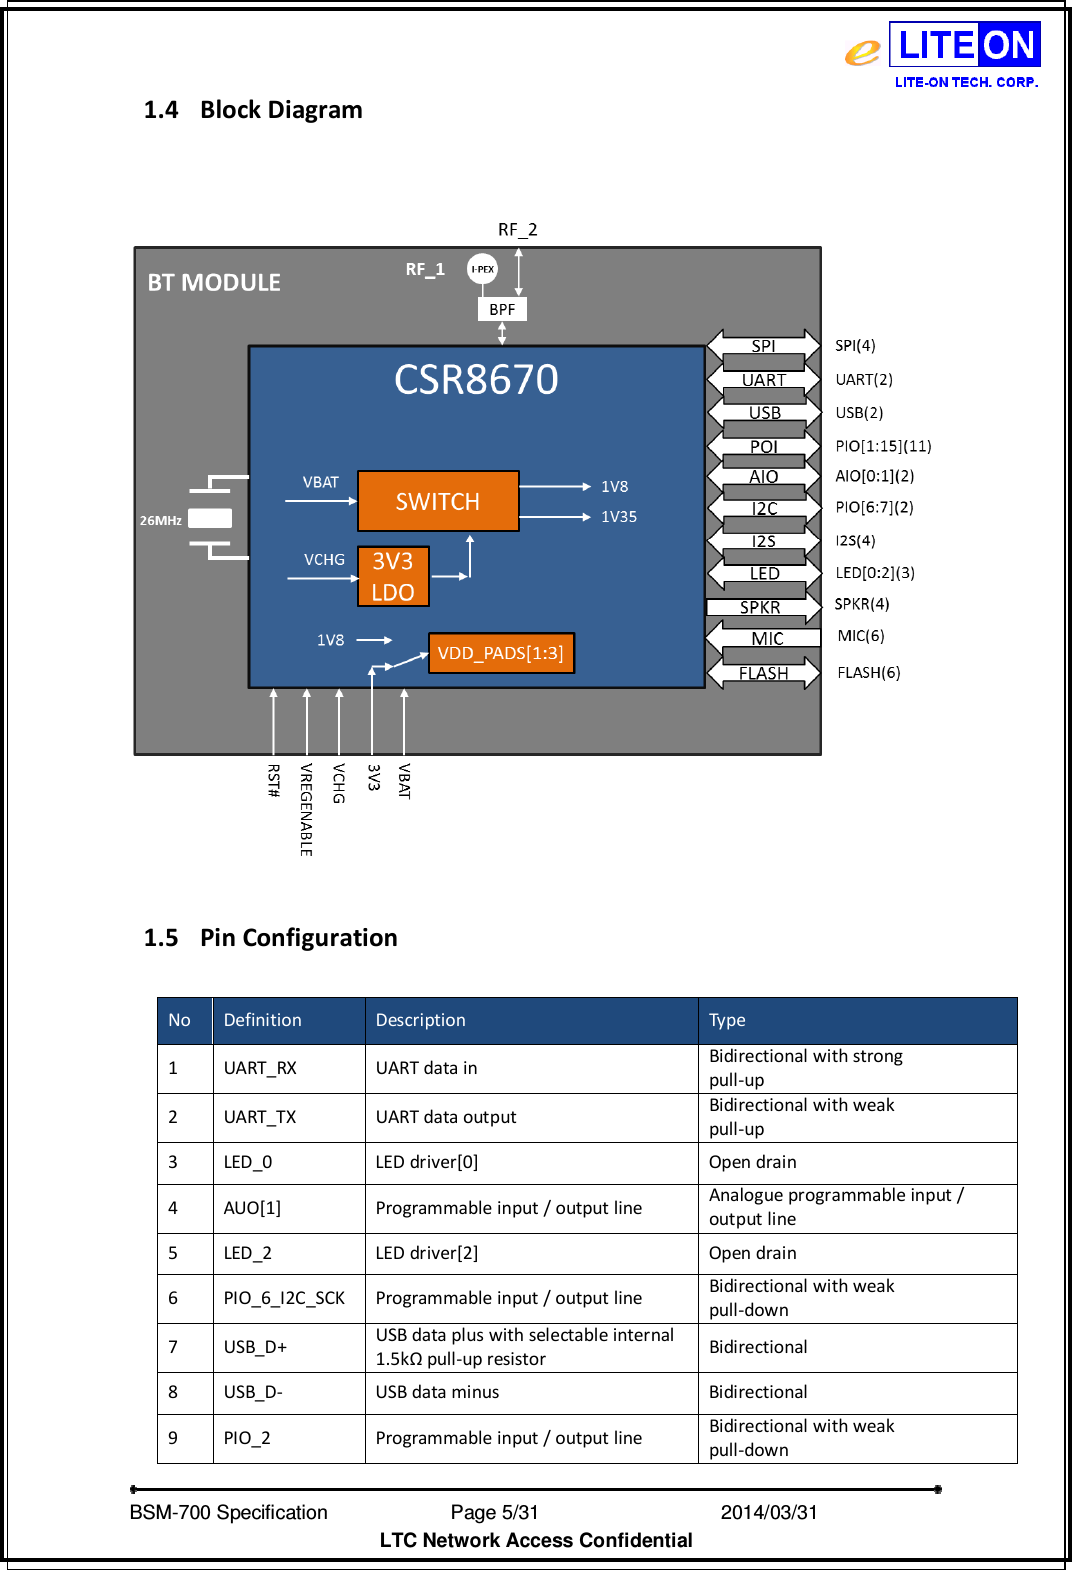   BSM-700 Specification                Page 5/31                            2014/03/31 LTC Network Access Confidential 1.4 Block Diagram       1.5 Pin Configuration    No  Definition  Description  Type 1  UART_RX  UART data in Bidirectional with strong pull-up 2  UART_TX  UART data output Bidirectional with weak pull-up 3  LED_0  LED driver[0]  Open drain 4  AUO[1]  Programmable input / output line Analogue programmable input / output line 5  LED_2  LED driver[2]  Open drain 6  PIO_6_I2C_SCK  Programmable input / output line Bidirectional with weak pull-down 7  USB_D+ USB data plus with selectable internal 1.5kΩ pull-up resistor  Bidirectional 8  USB_D-  USB data minus  Bidirectional 9  PIO_2  Programmable input / output line Bidirectional with weak pull-down 